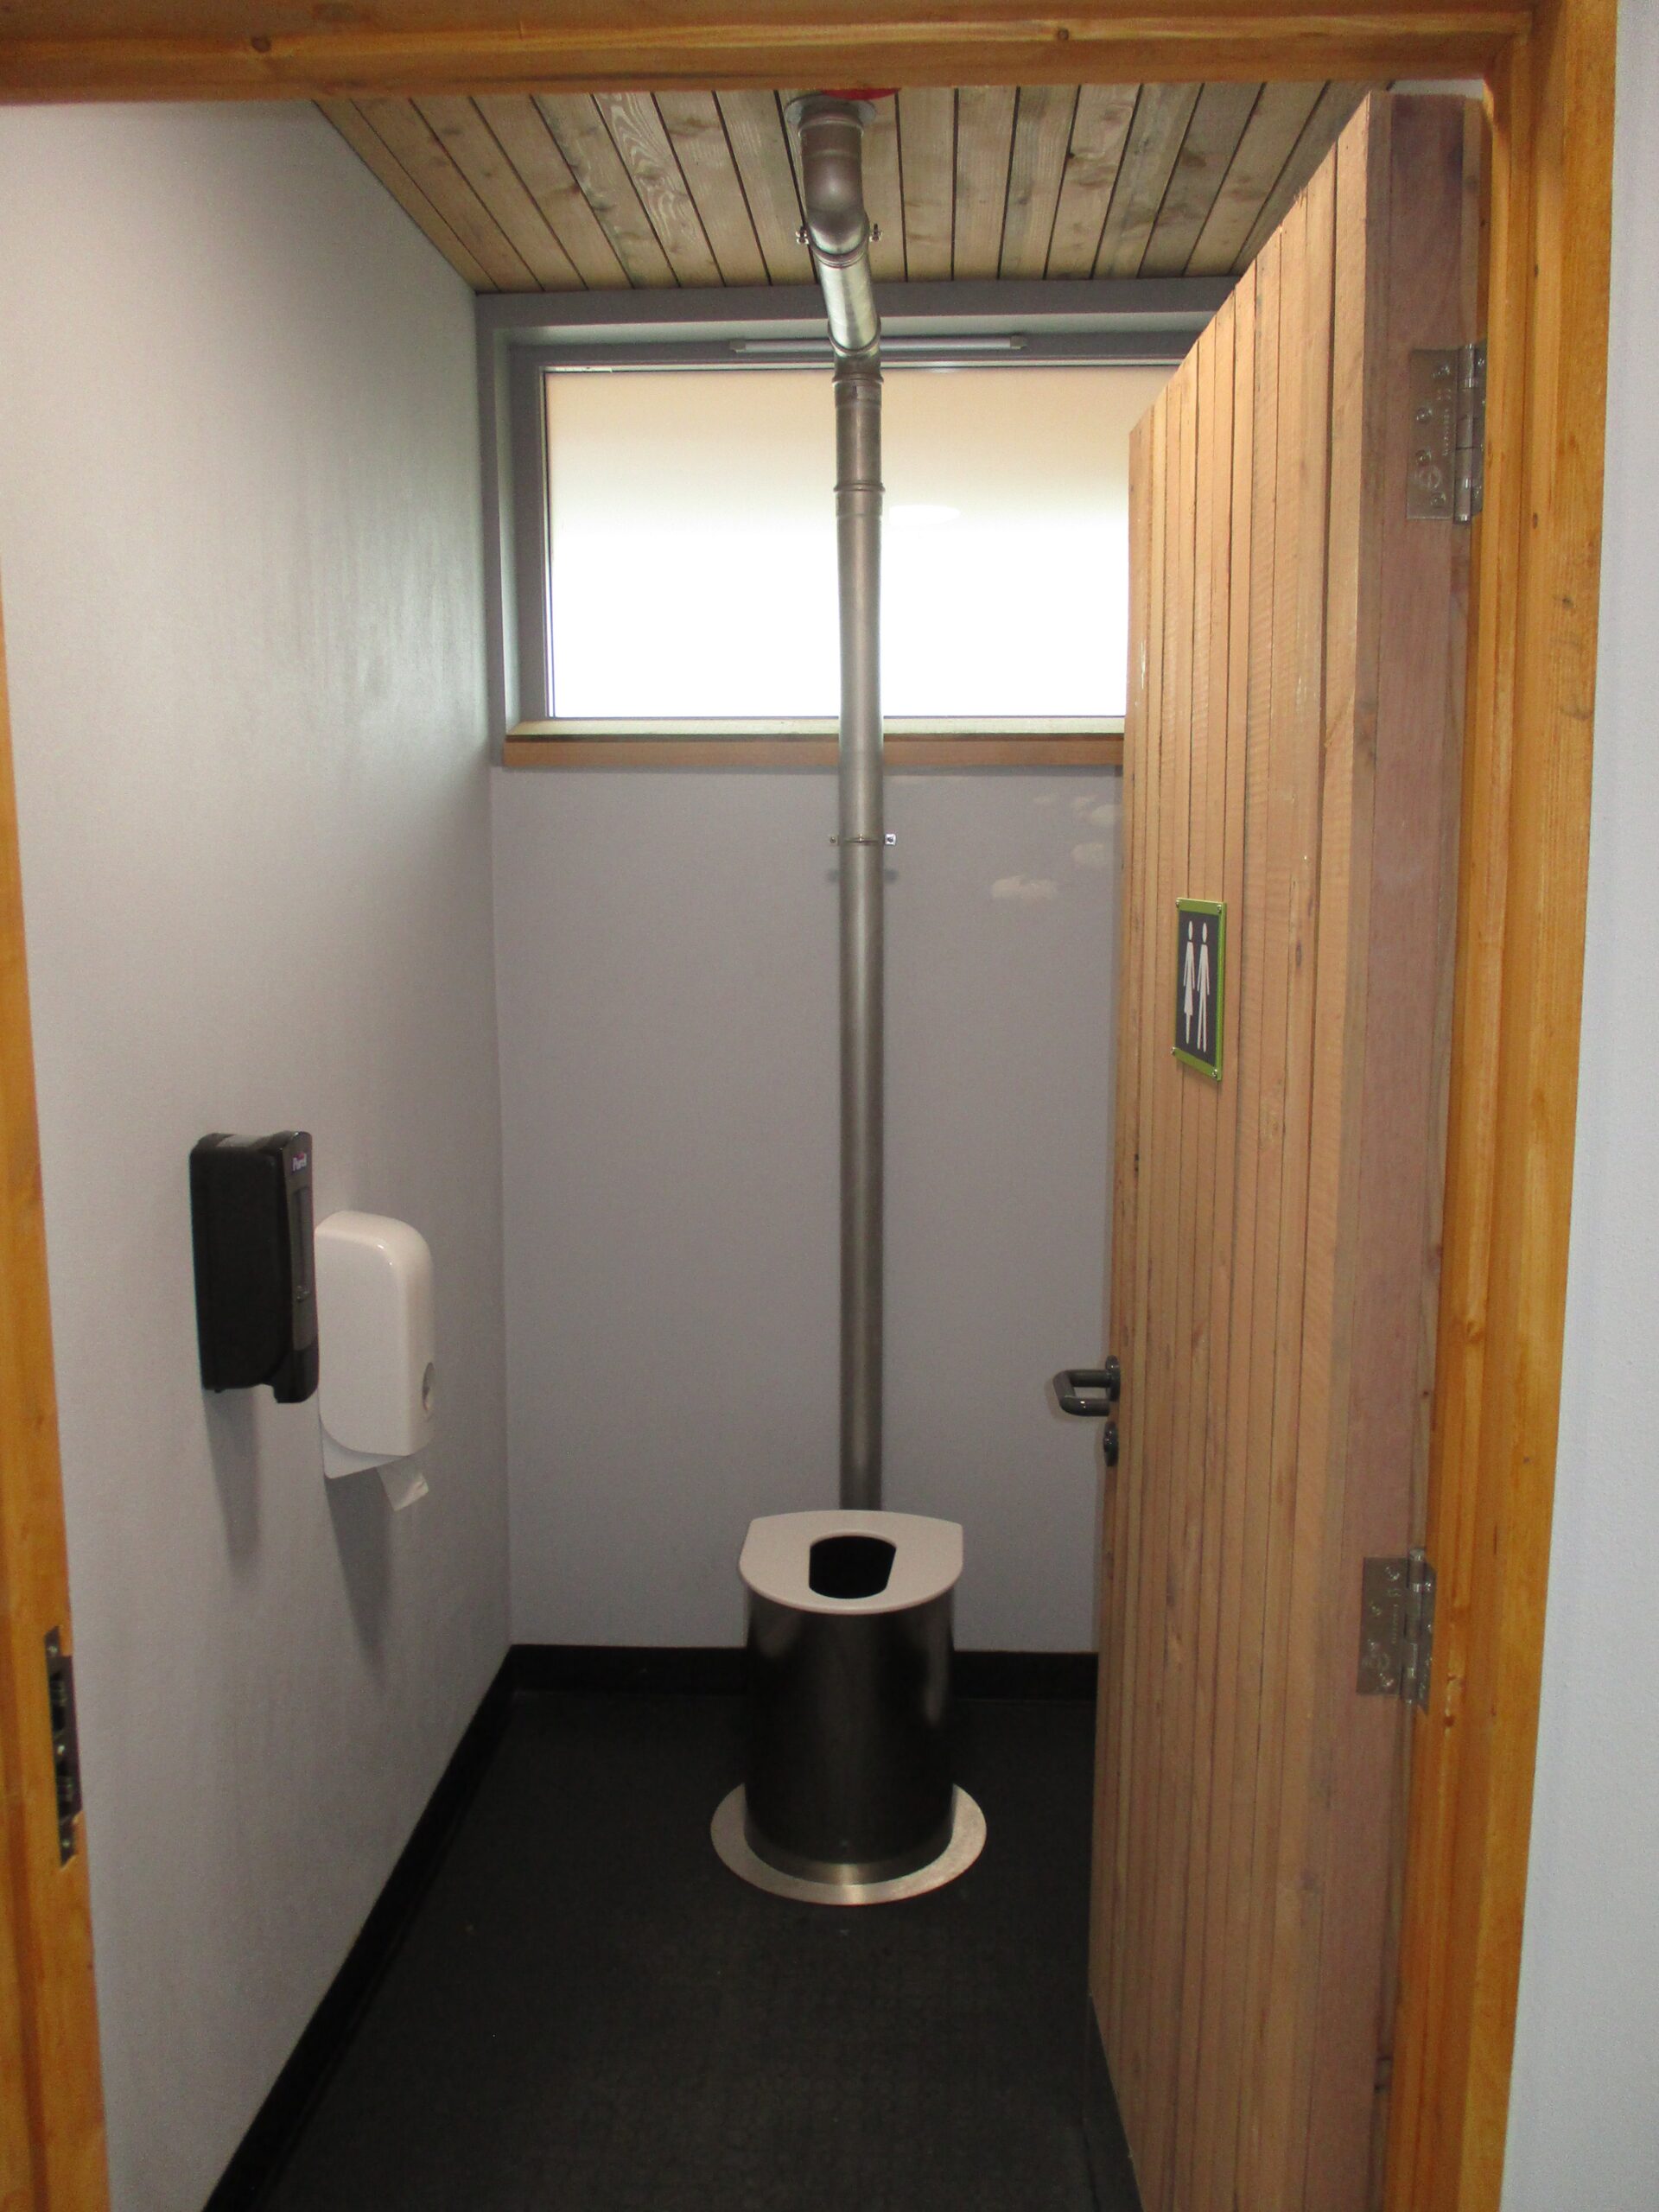 Golf Course toilets supplied by Natsol